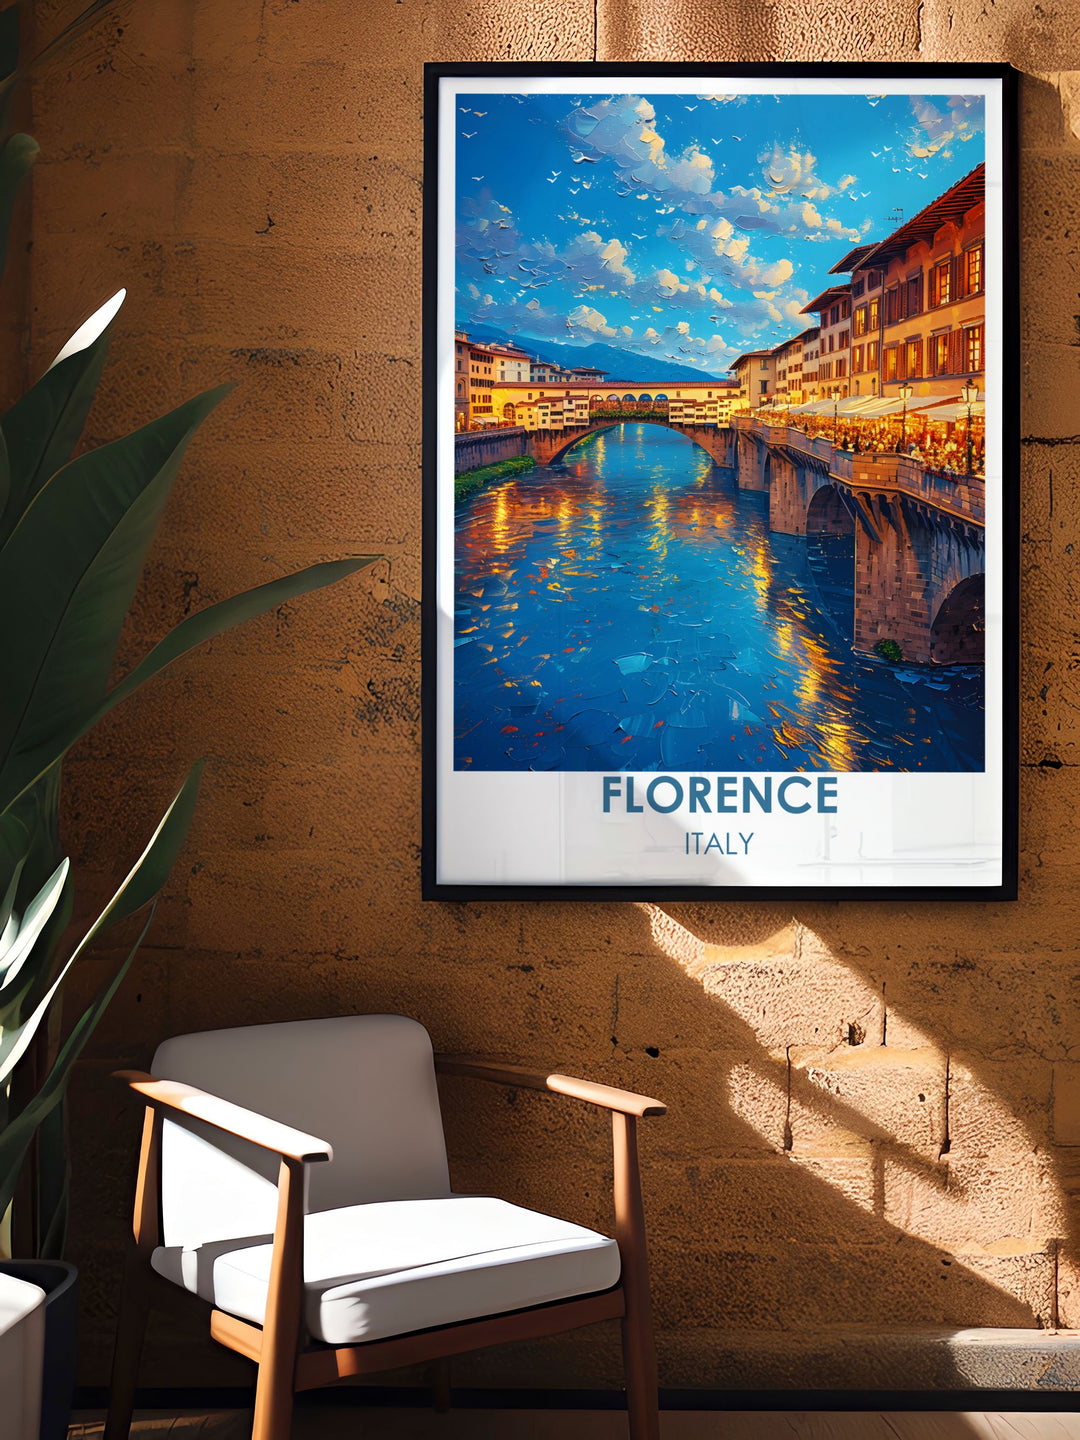 Gallery wall art featuring the Ponte Vecchio, providing a picturesque view of this historic bridge in Florence.